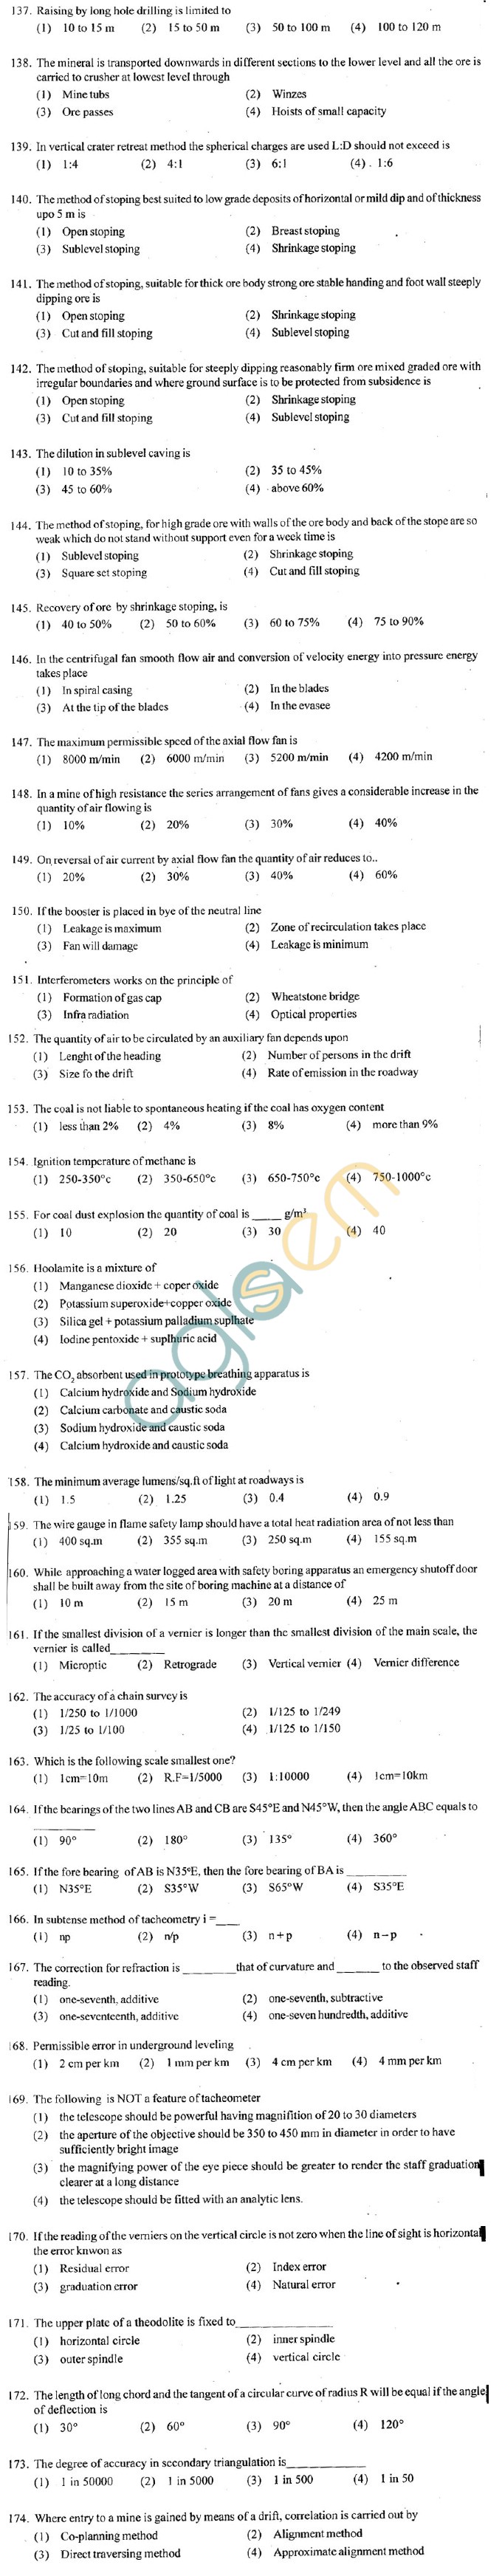 ECET 2012 Question Paper with Answers - Mining Engineering